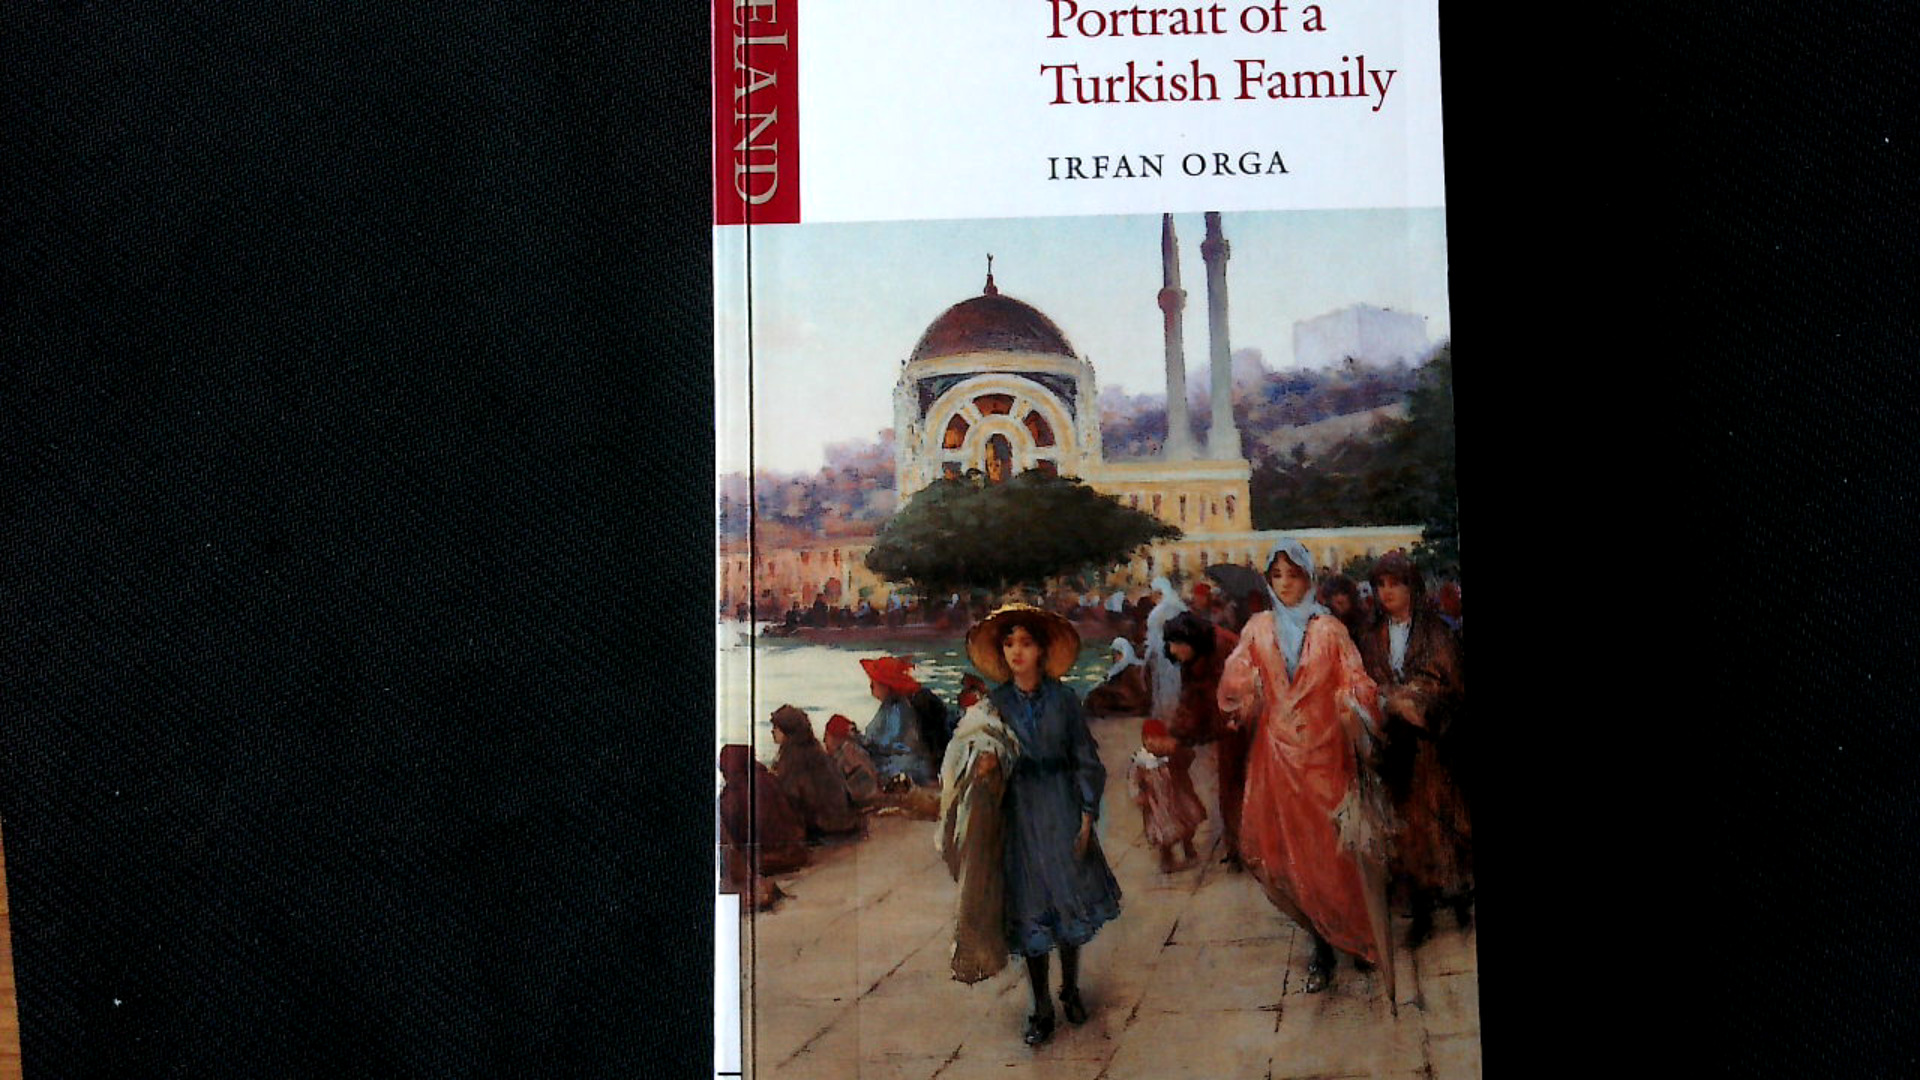 PORTRAIT OF A TURKISH FAMILY.